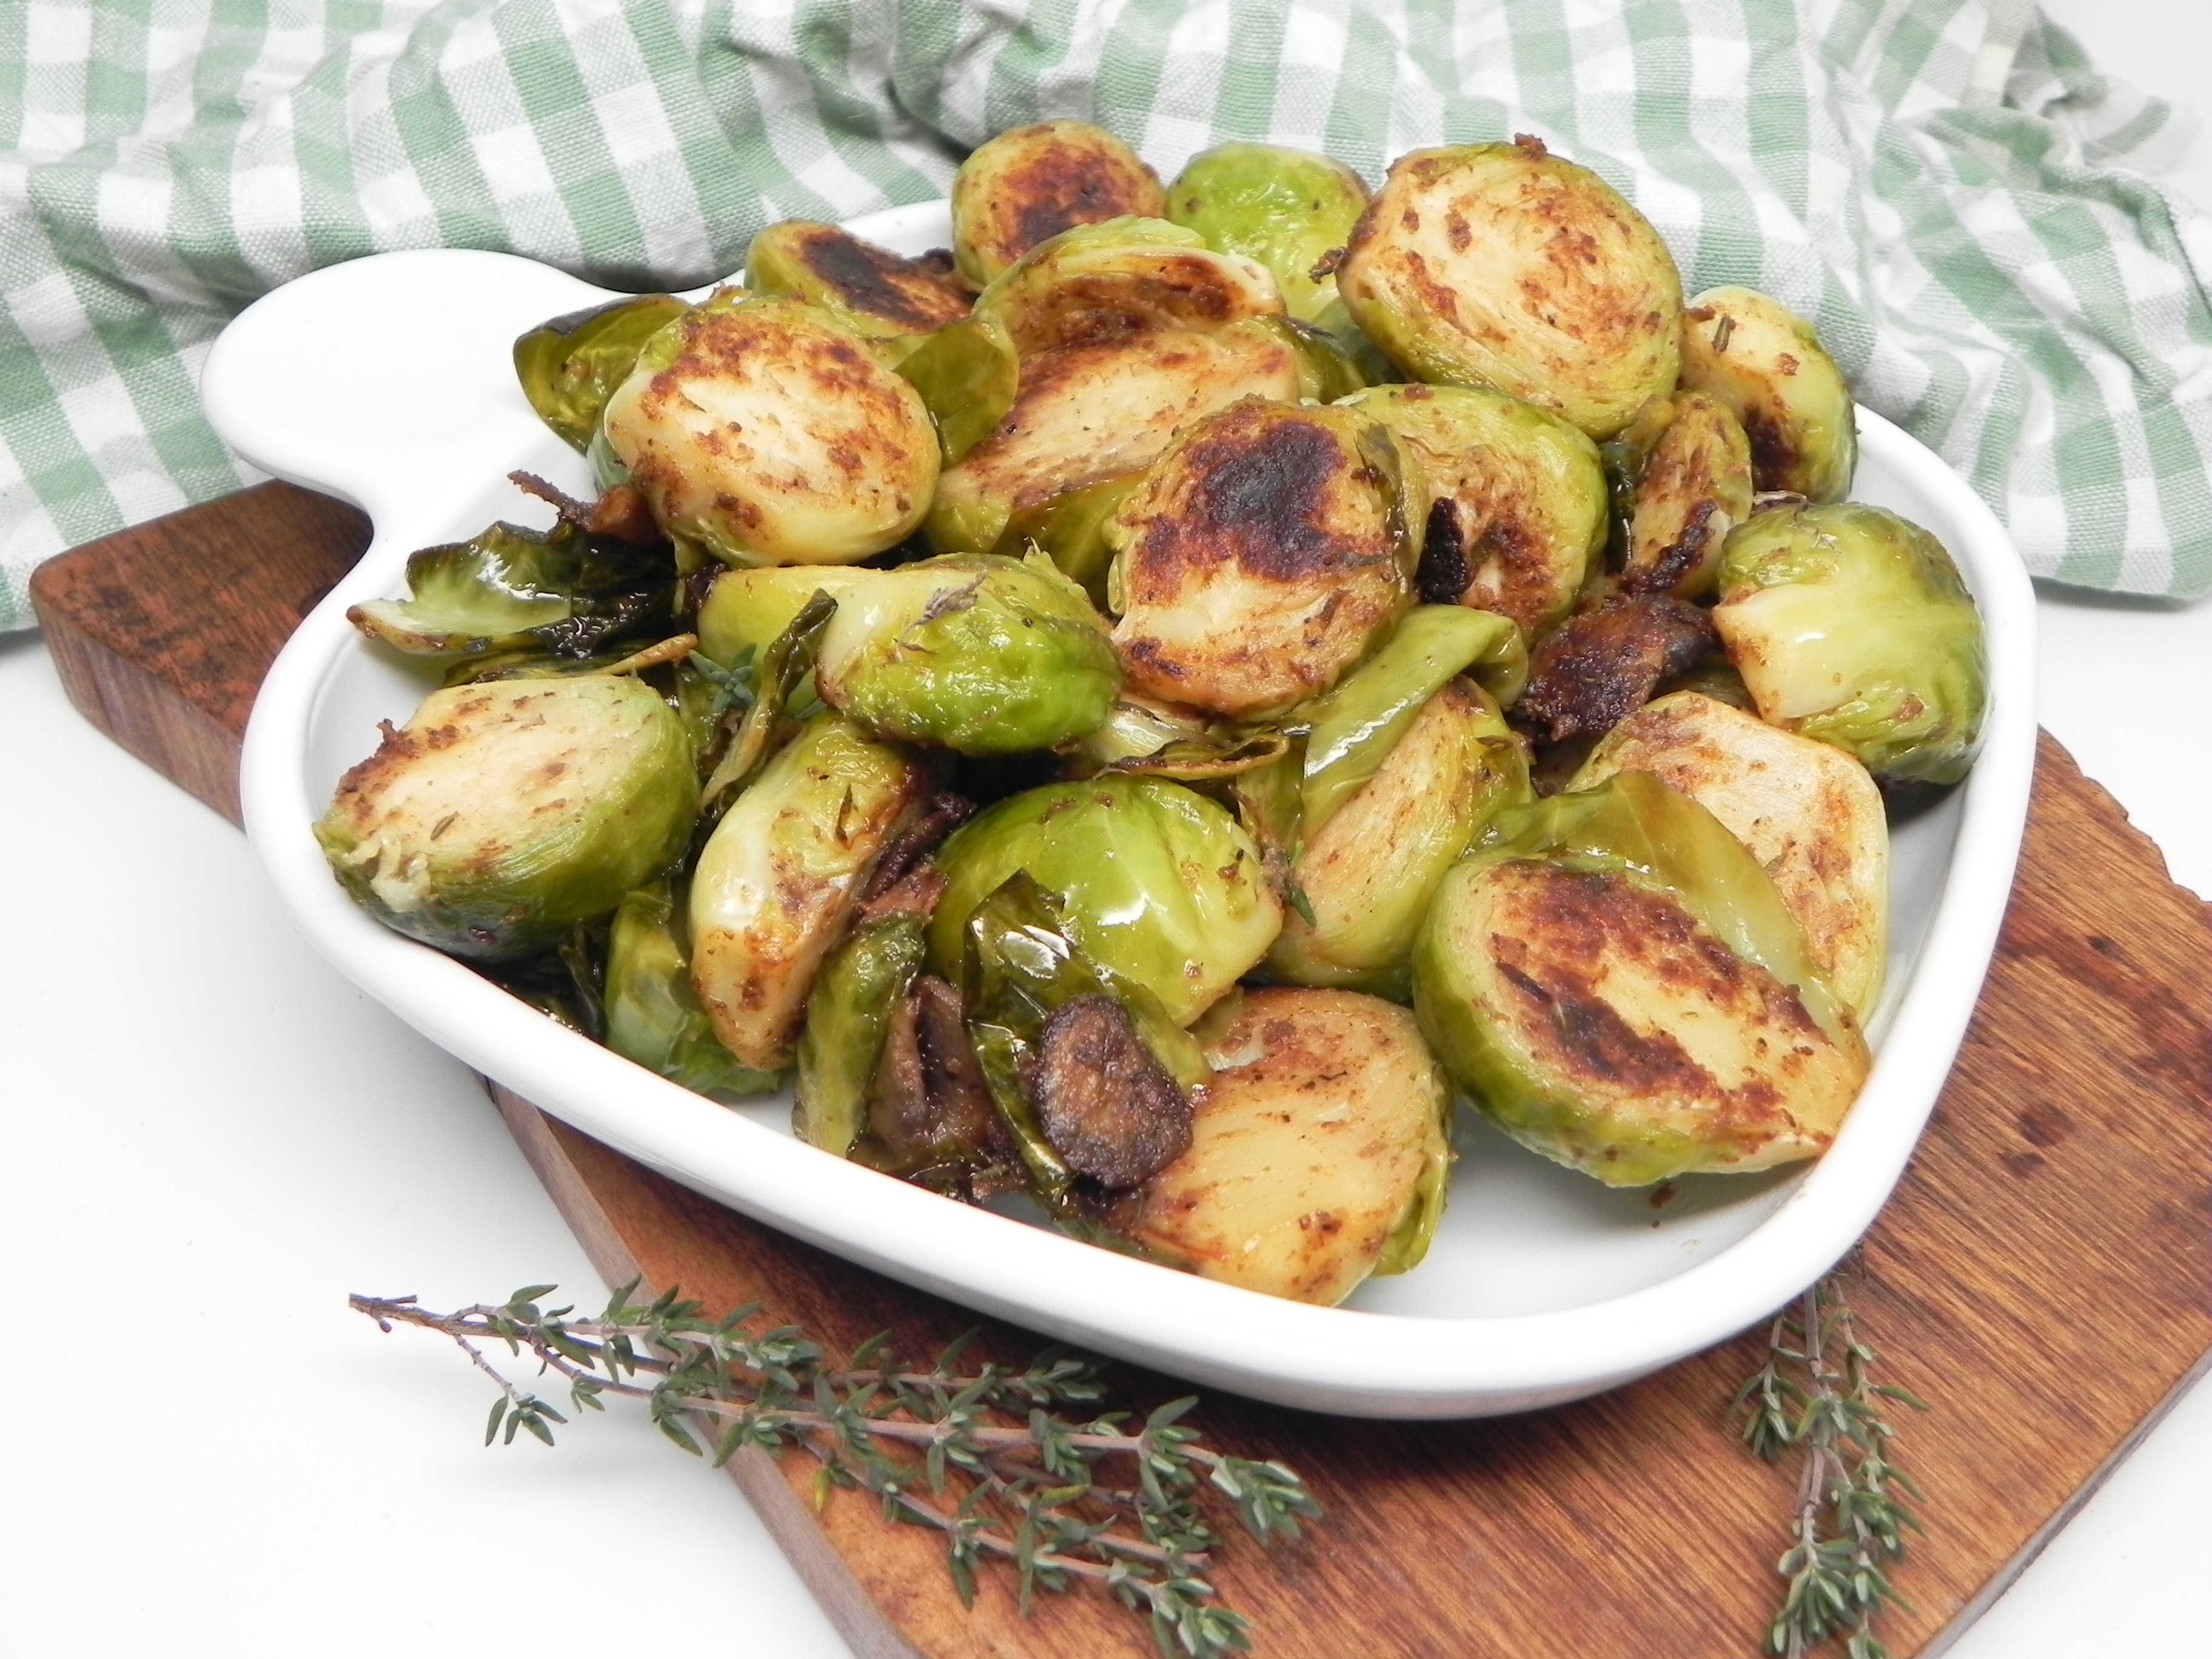 Pan-Fried Brussels Sprouts and Mushrooms with Thyme